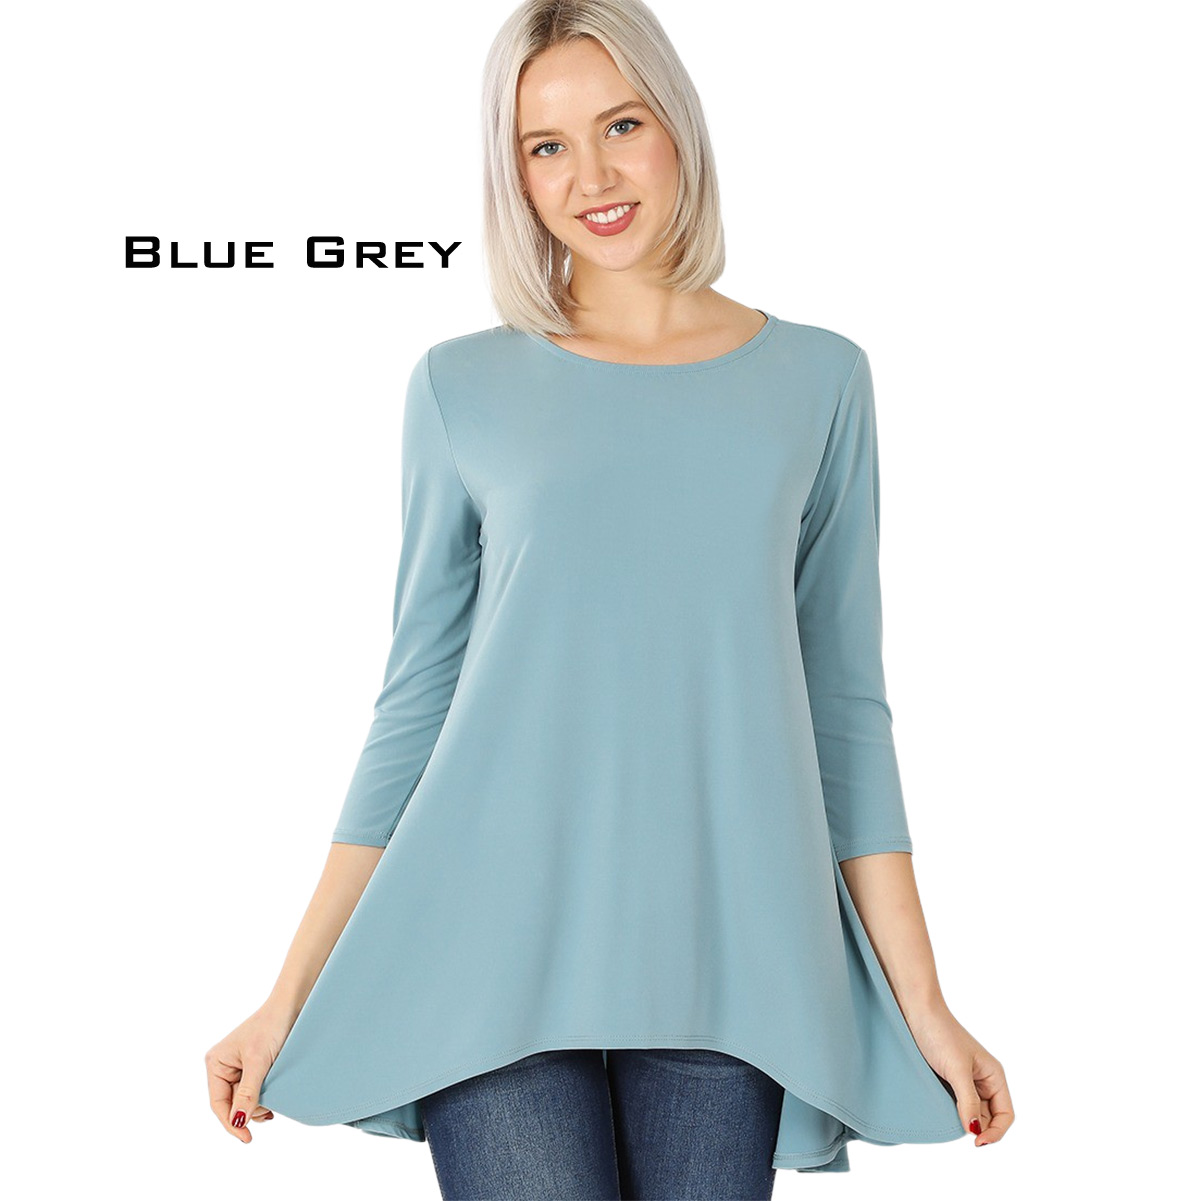 2367 - Ity High-Low 3/4 Sleeve Top BLUE GREY Ity High-Low 3/4 Sleeve Top 2367 - Large